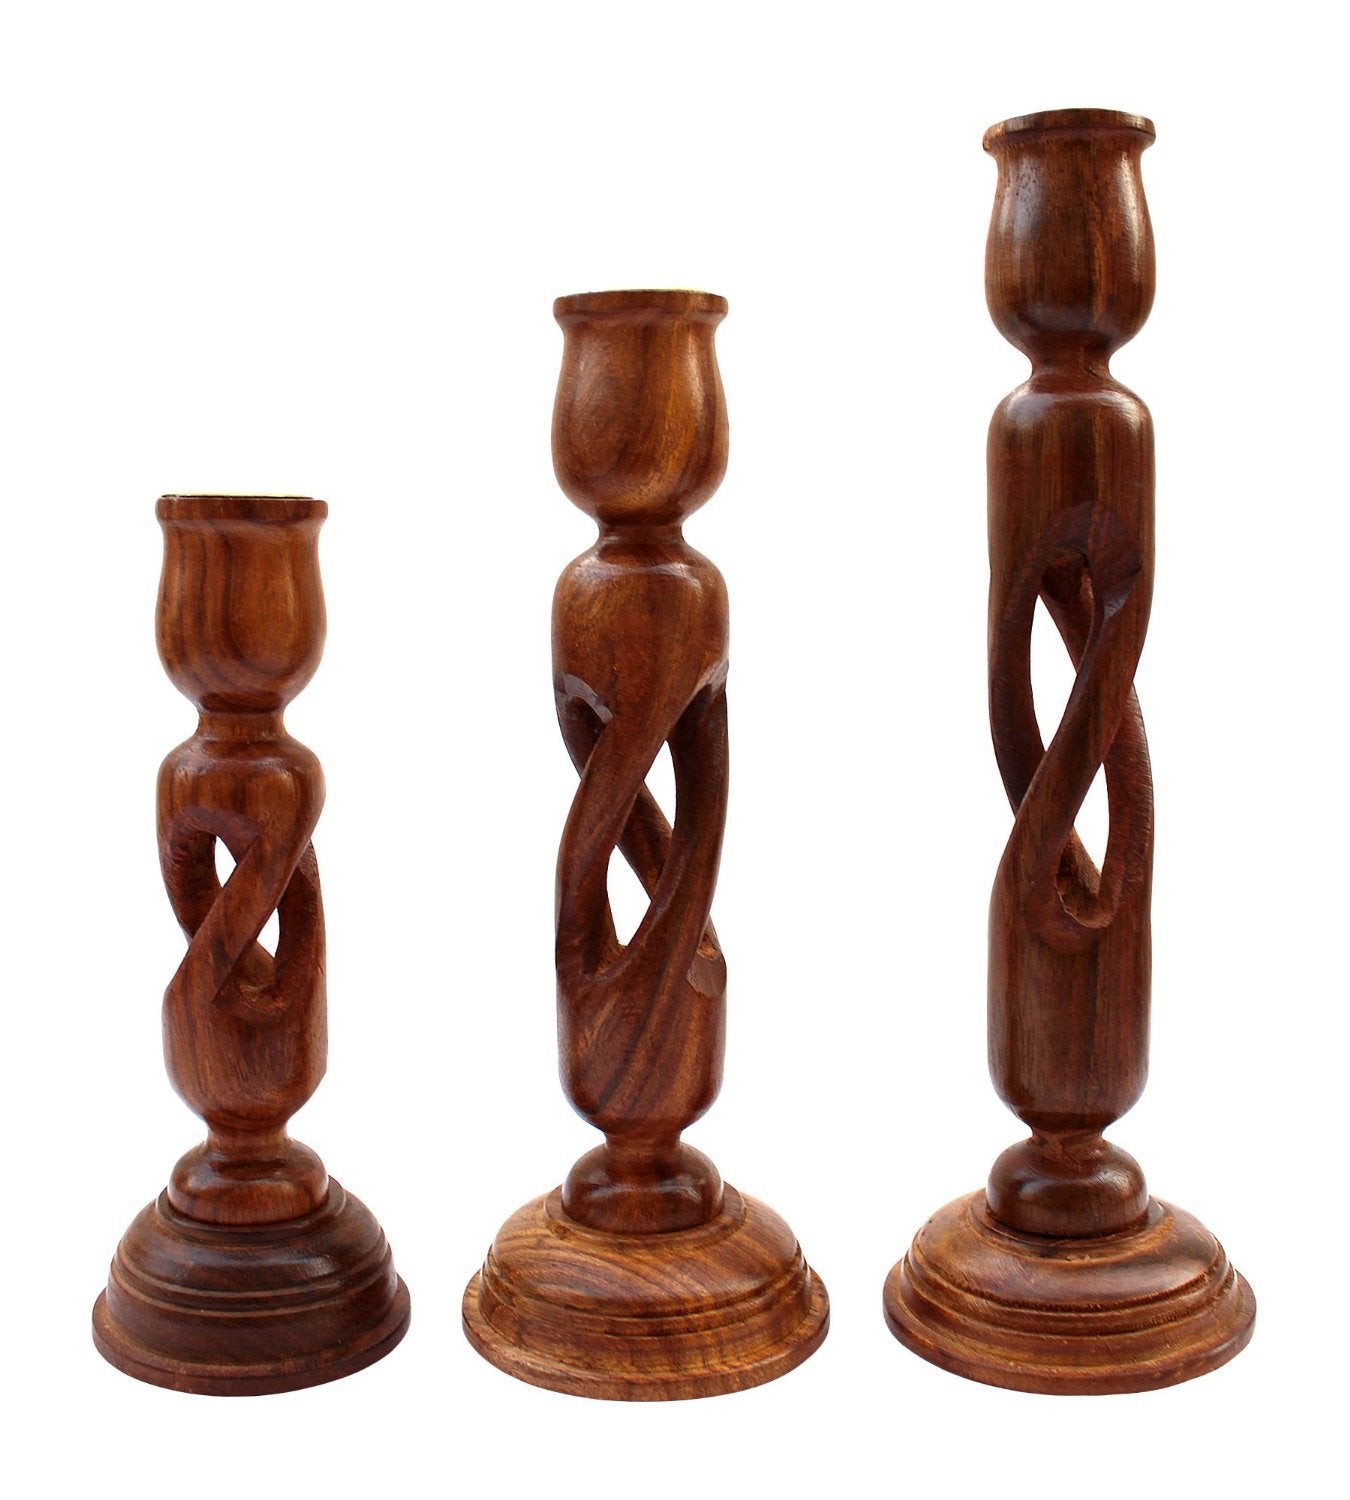 Wooden Candle Holder Stand for Home Decor Decorative Tealight Holder Set of 3 Candle Organiser